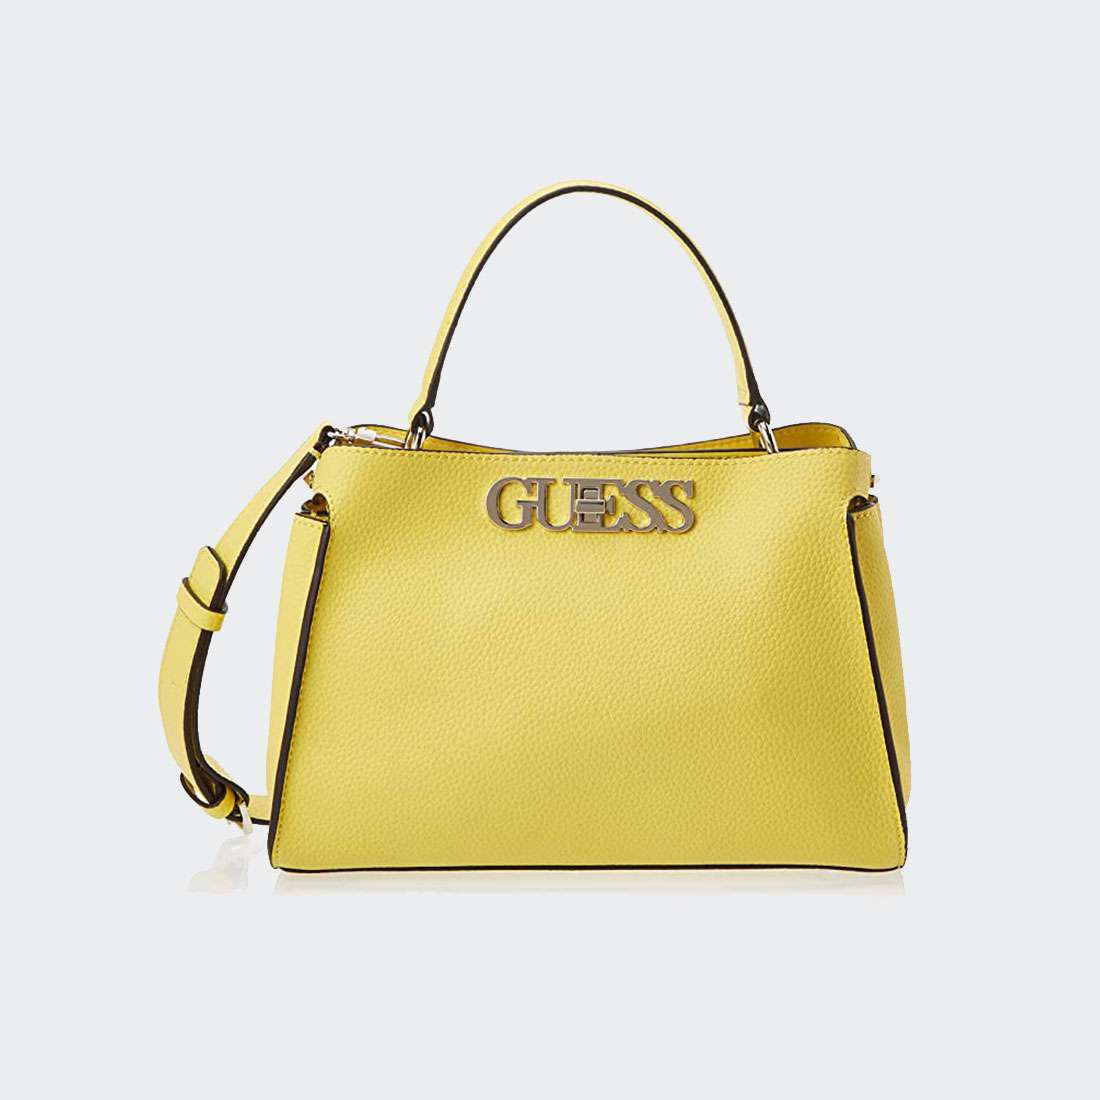 MALA GUESS UPTOWN CHIC TURNLOCK SATCHEL